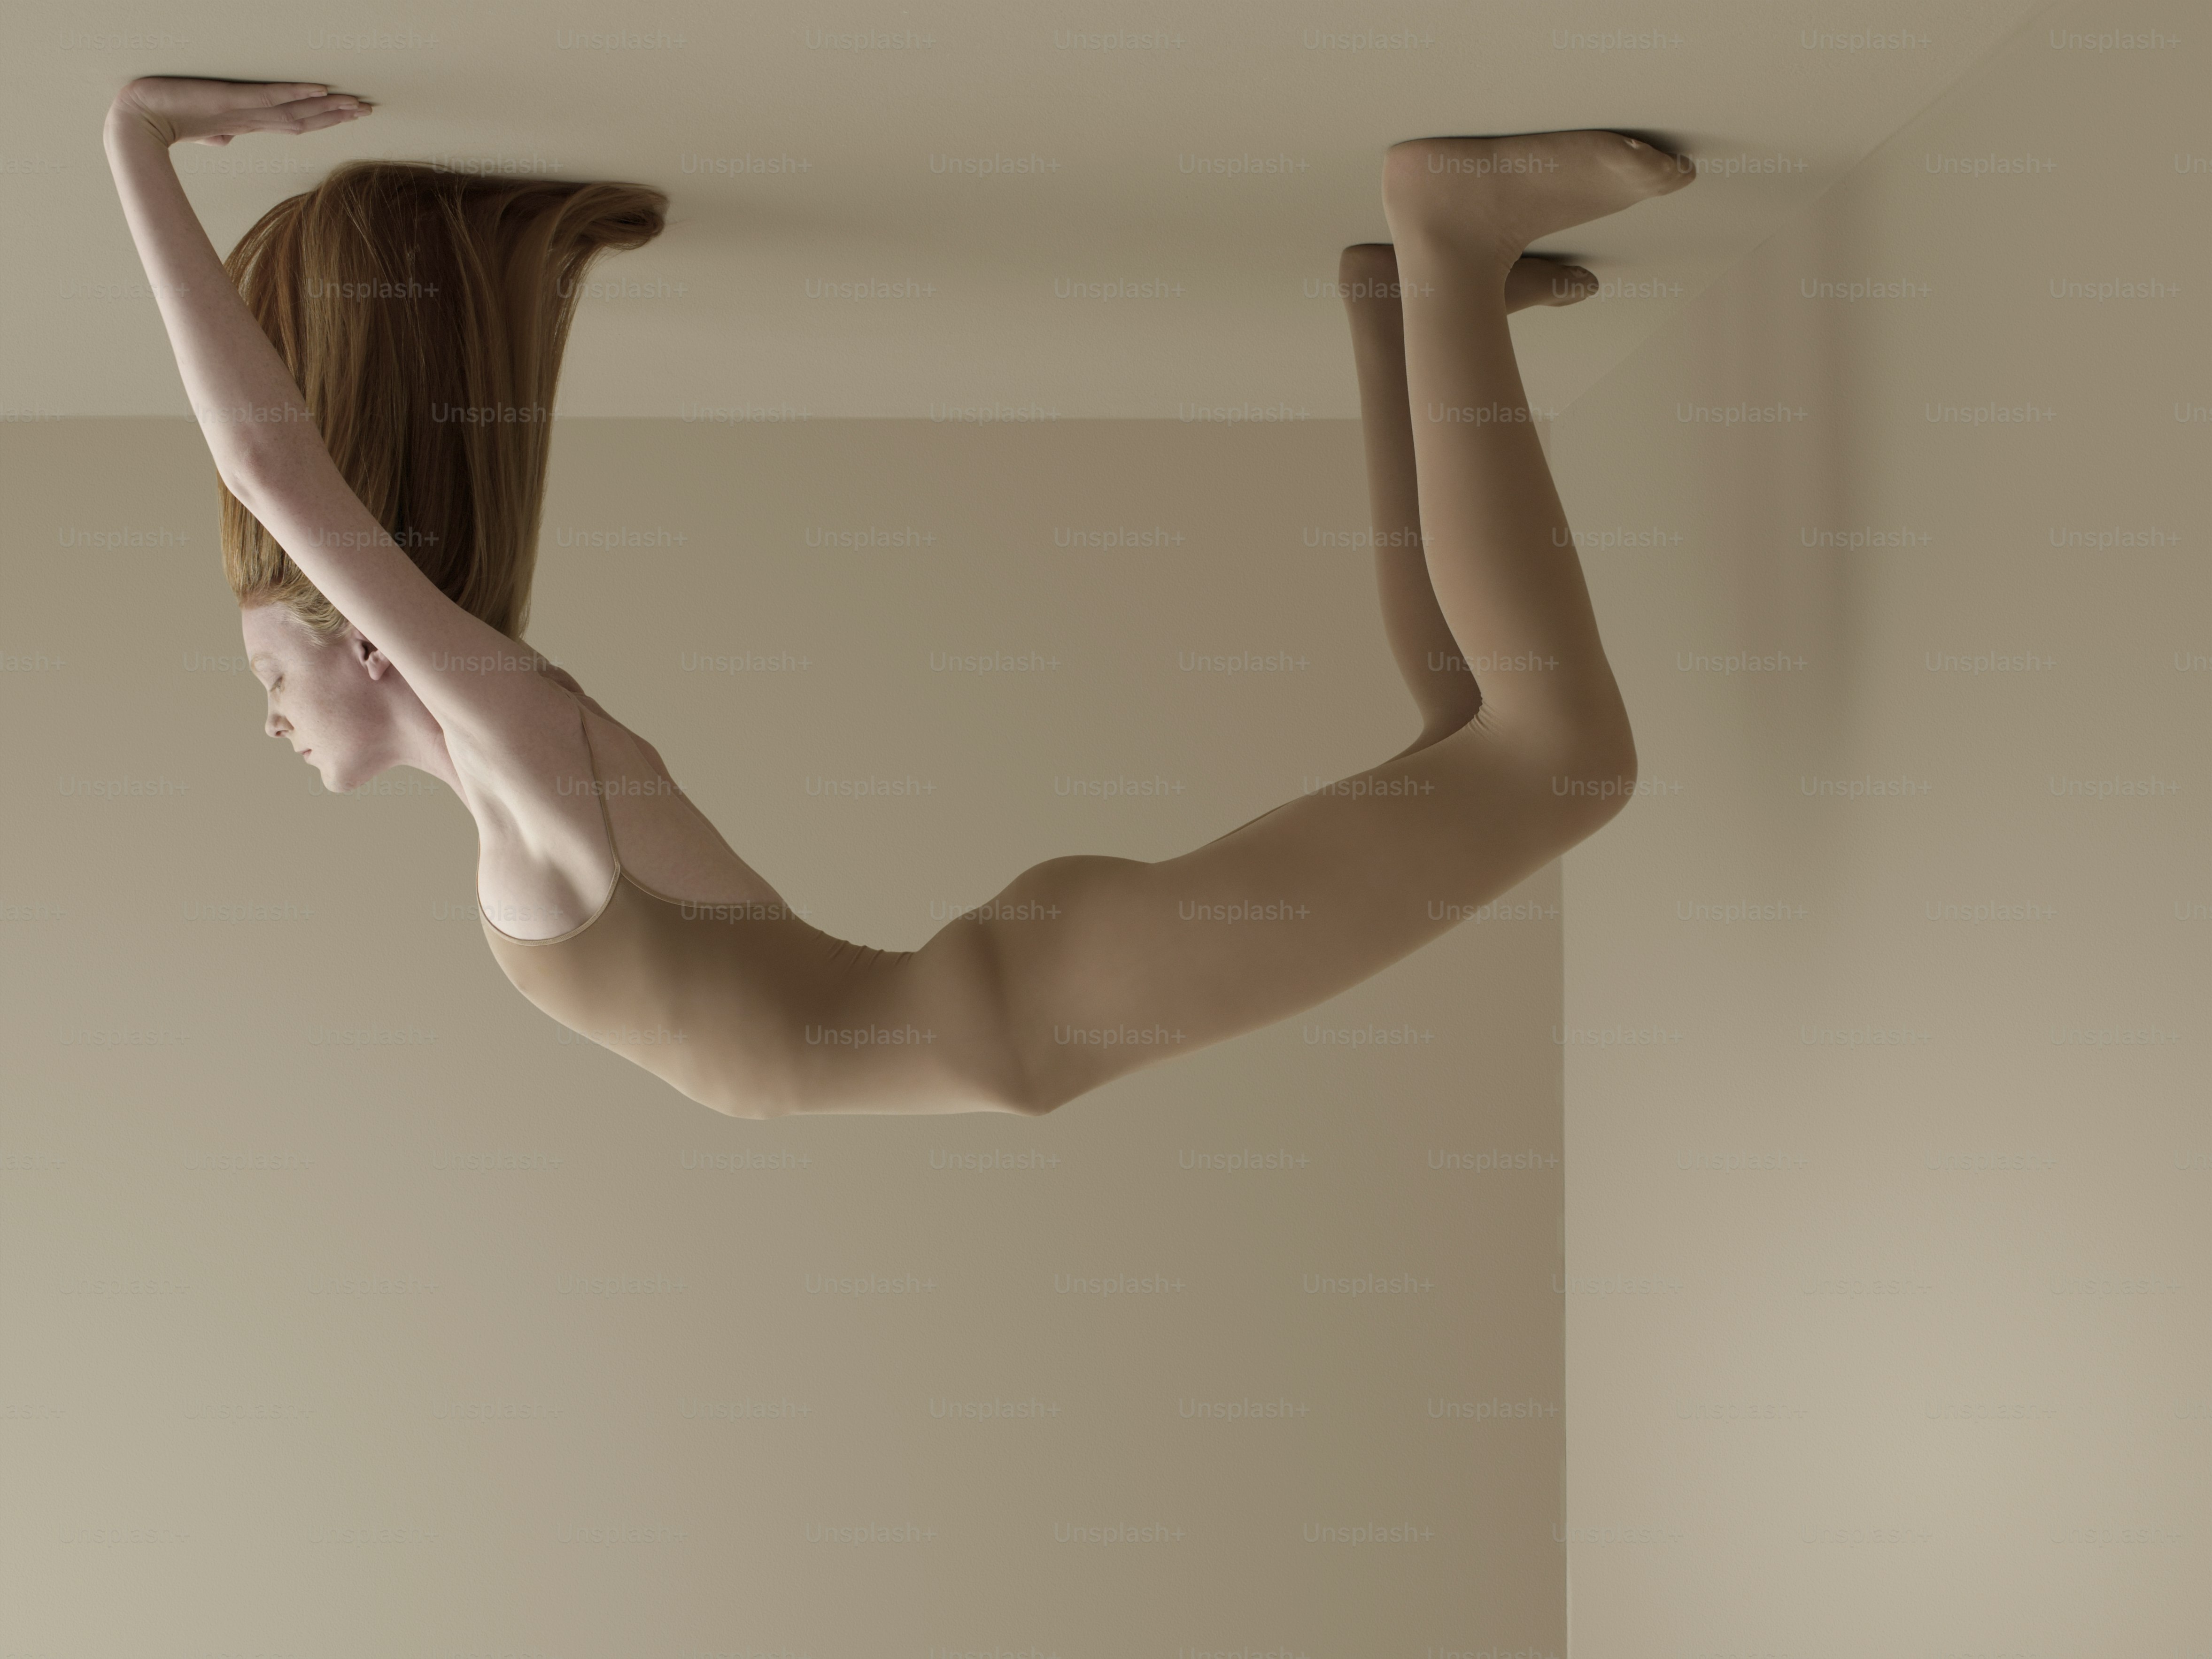 becky wolff share naked woman upside down photos